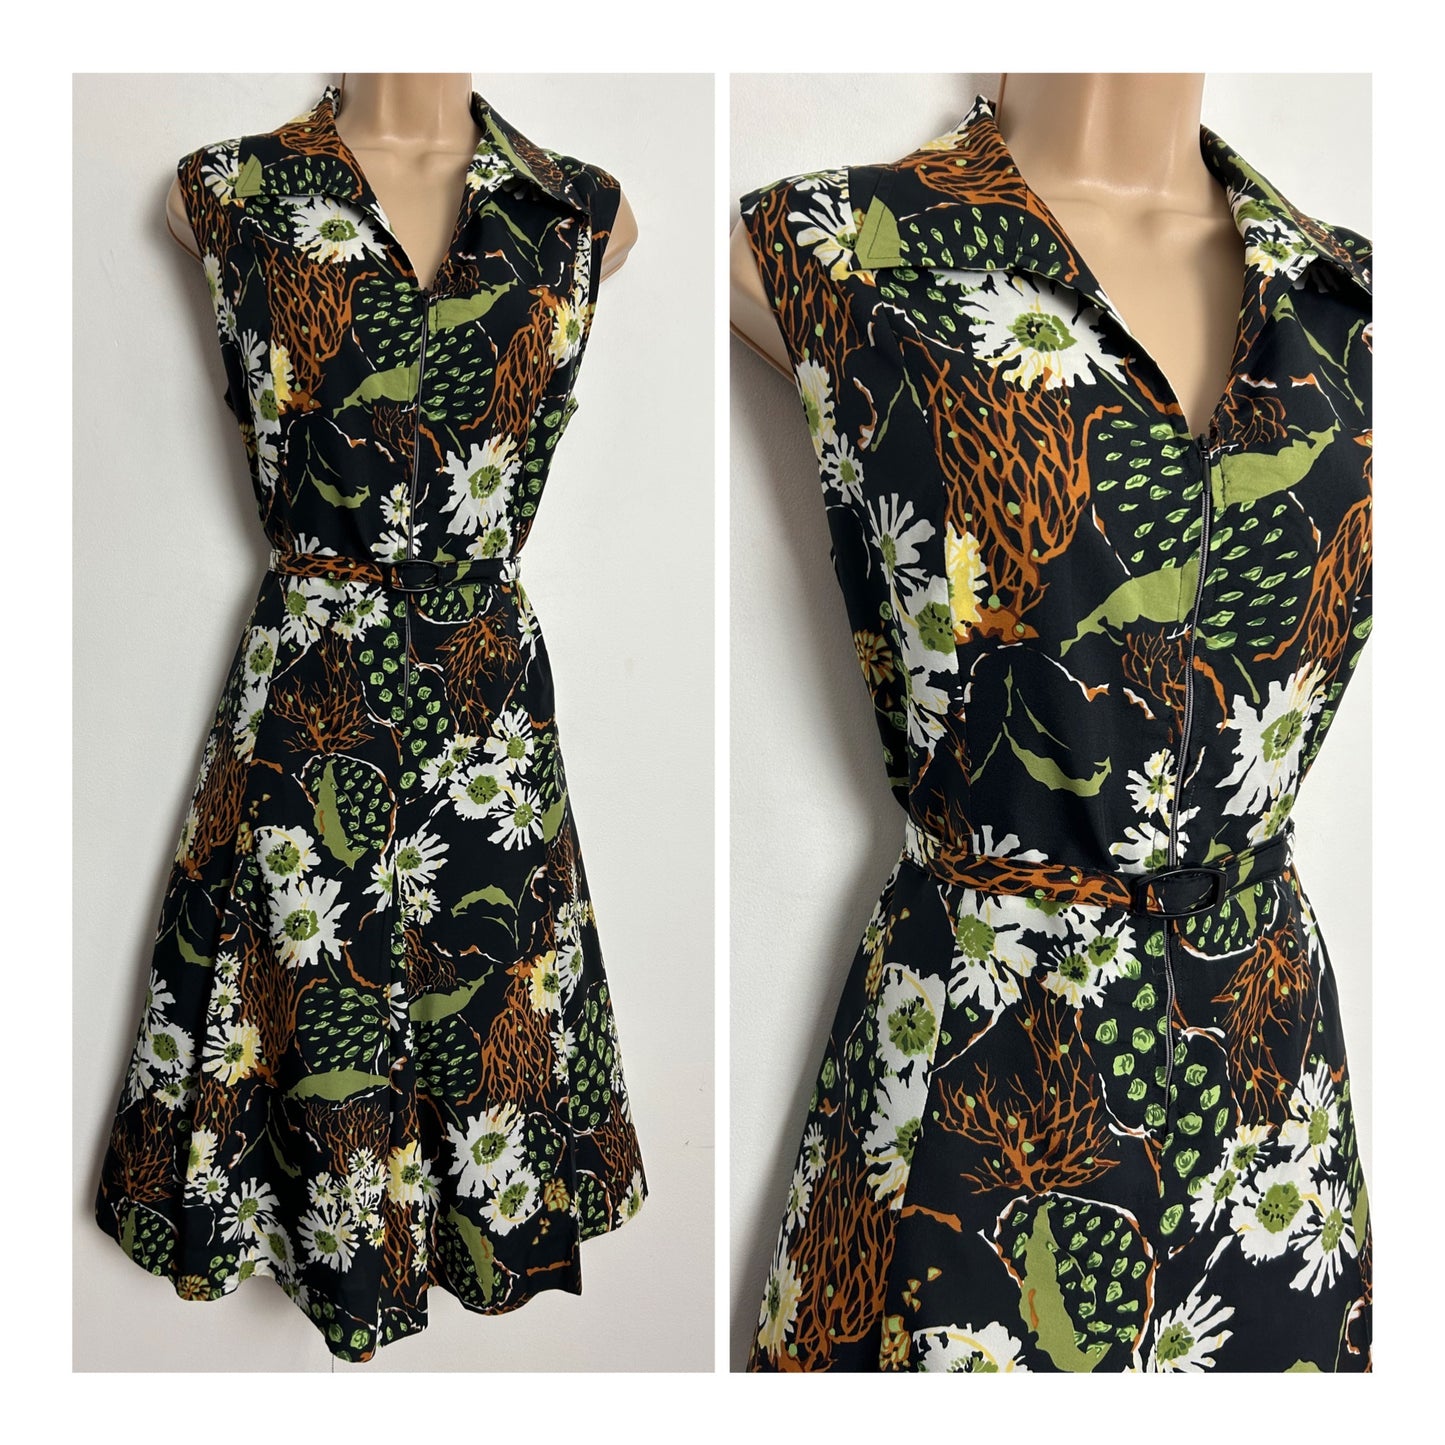 Vintage 1970s C&A UK Size 12-14 Black White Rust & Green Floral Print Belted Zip Front Fit & Flare Day Dress